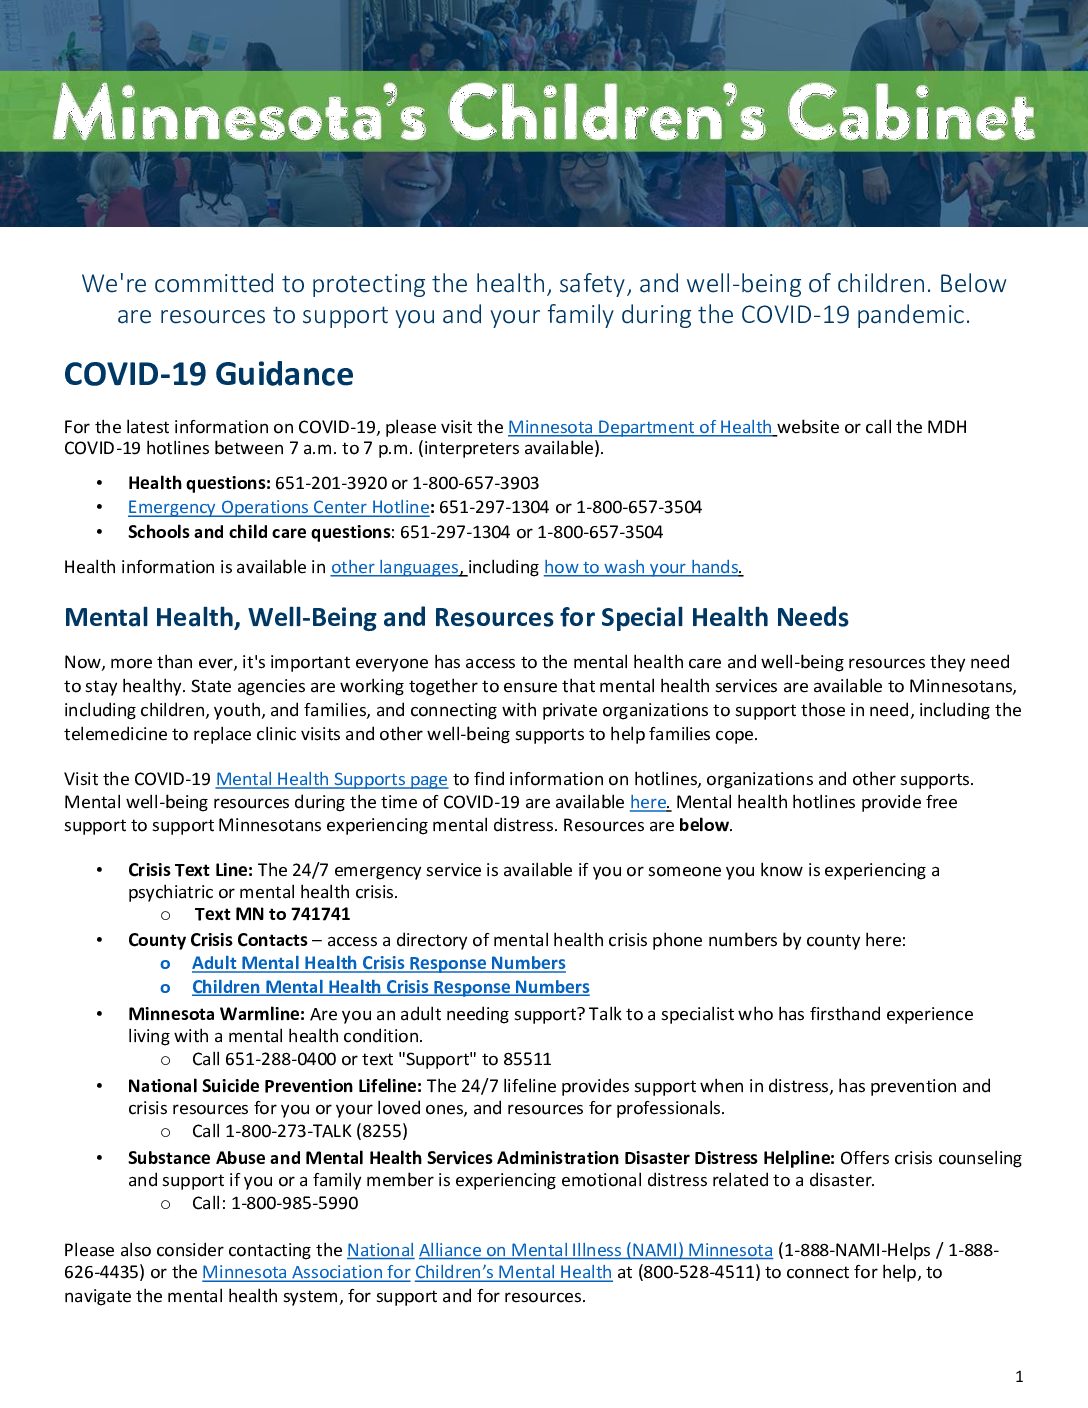 Children and Families Resources in Covid-19